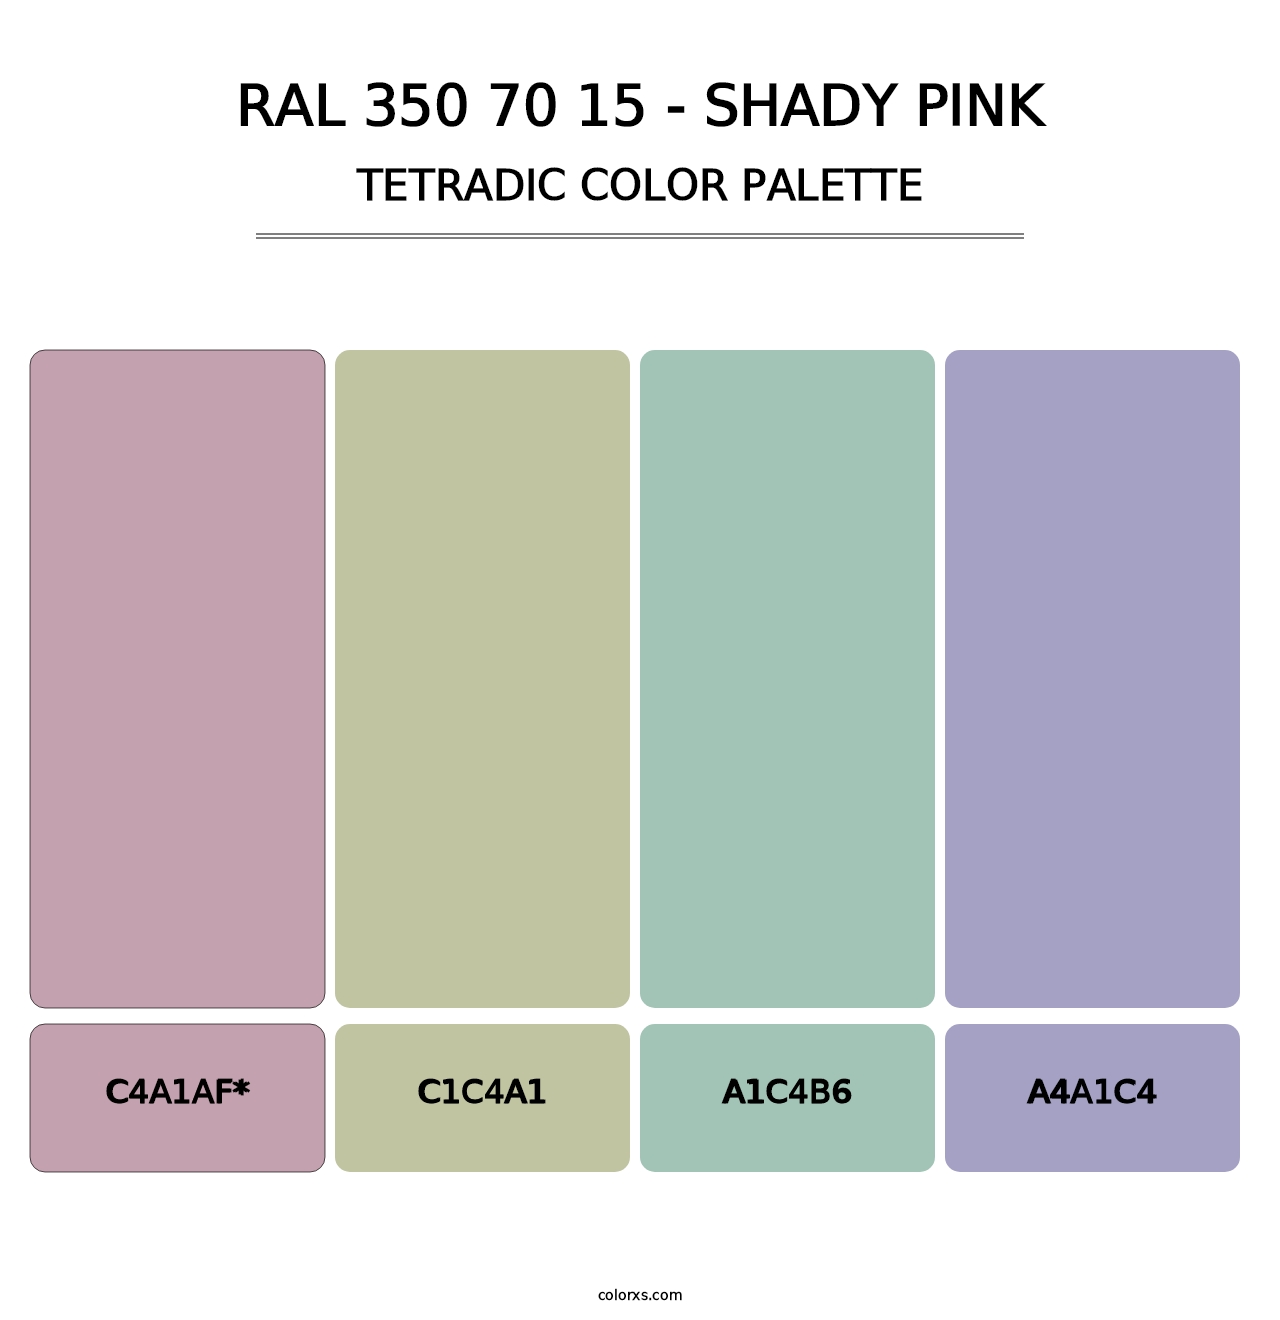 RAL 350 70 15 - Shady Pink - Tetradic Color Palette